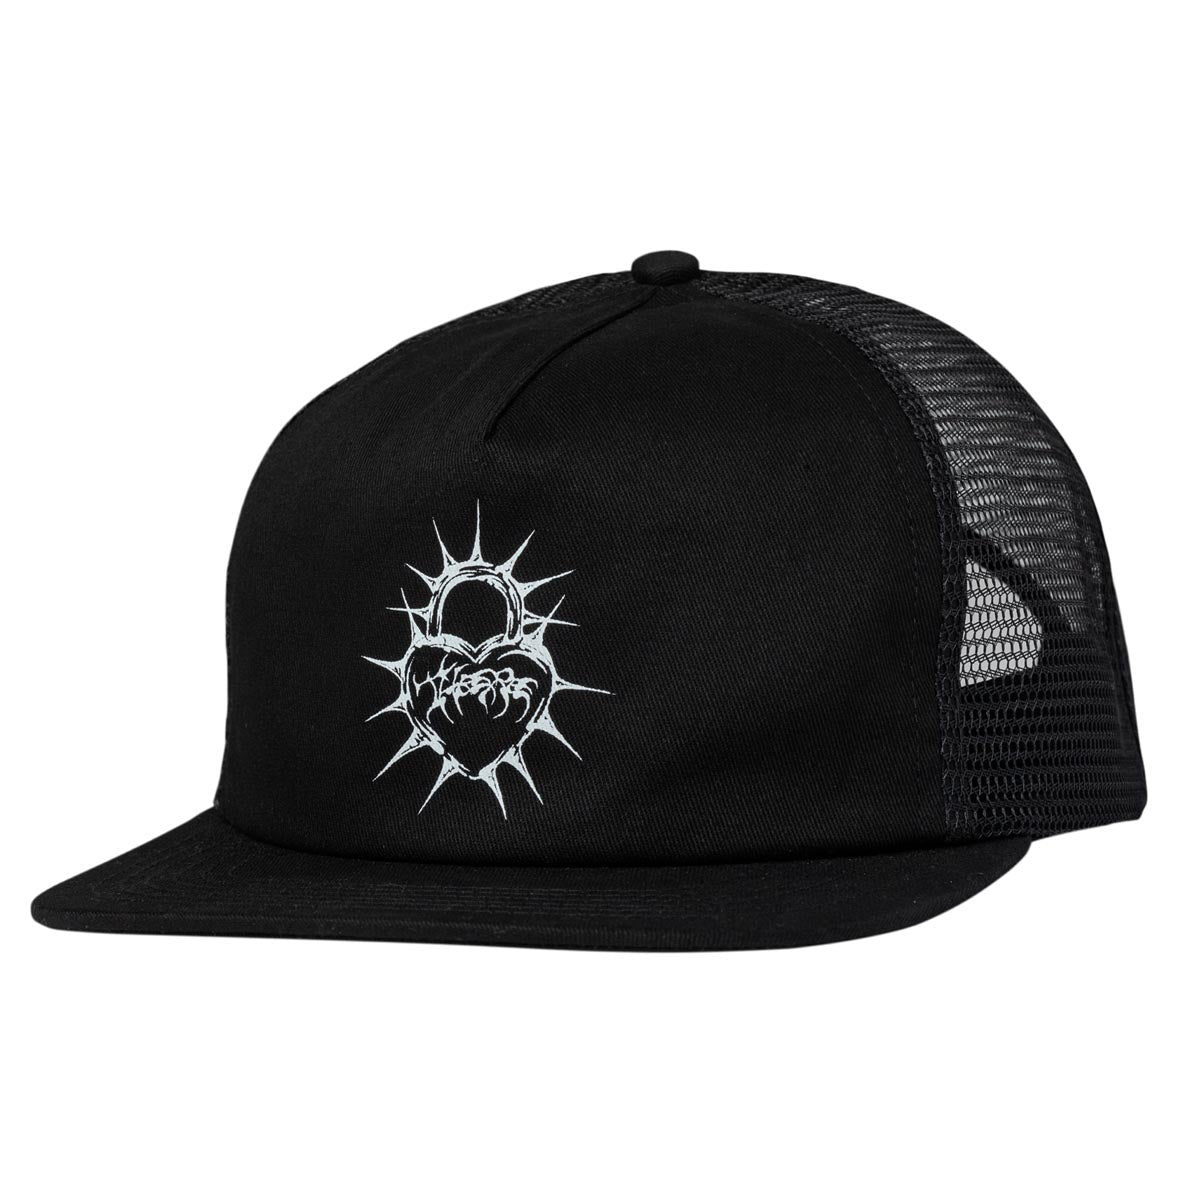 There Heart Snapback Hat - Black image 1